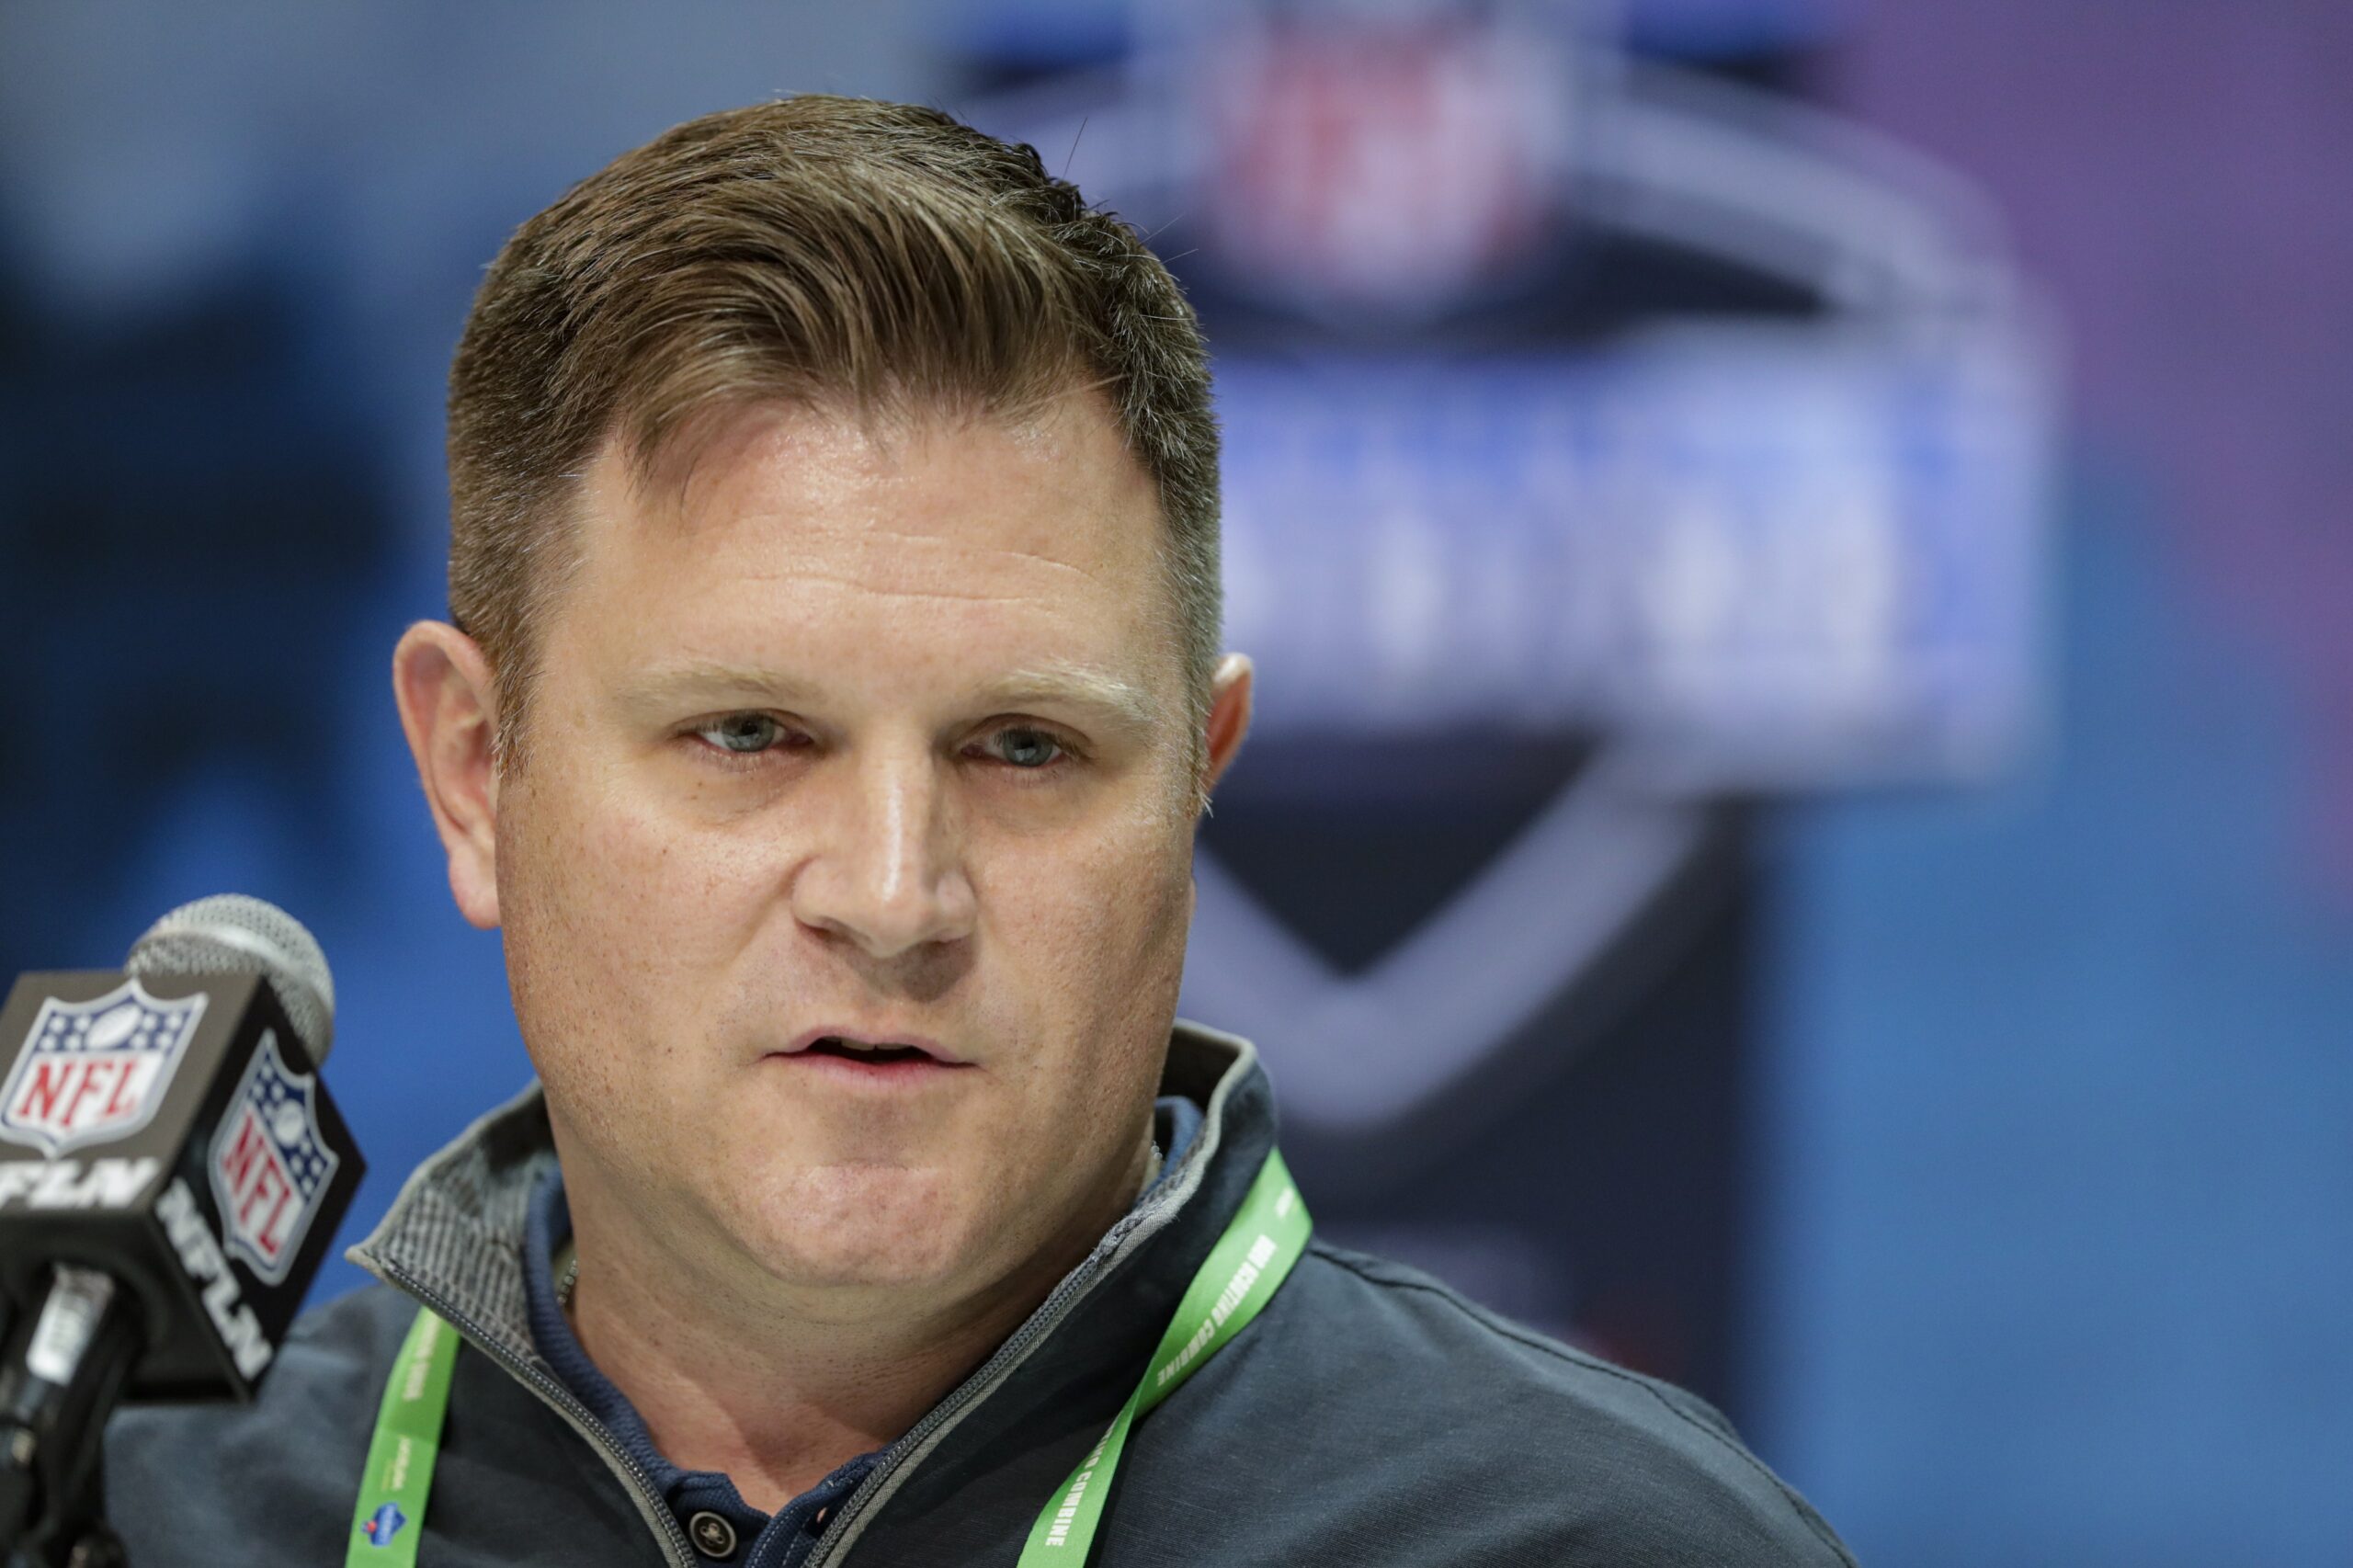 2021 NFL Draft: Packers GM Gutekunst Highlights Scouting Challenges Amid Pandemic